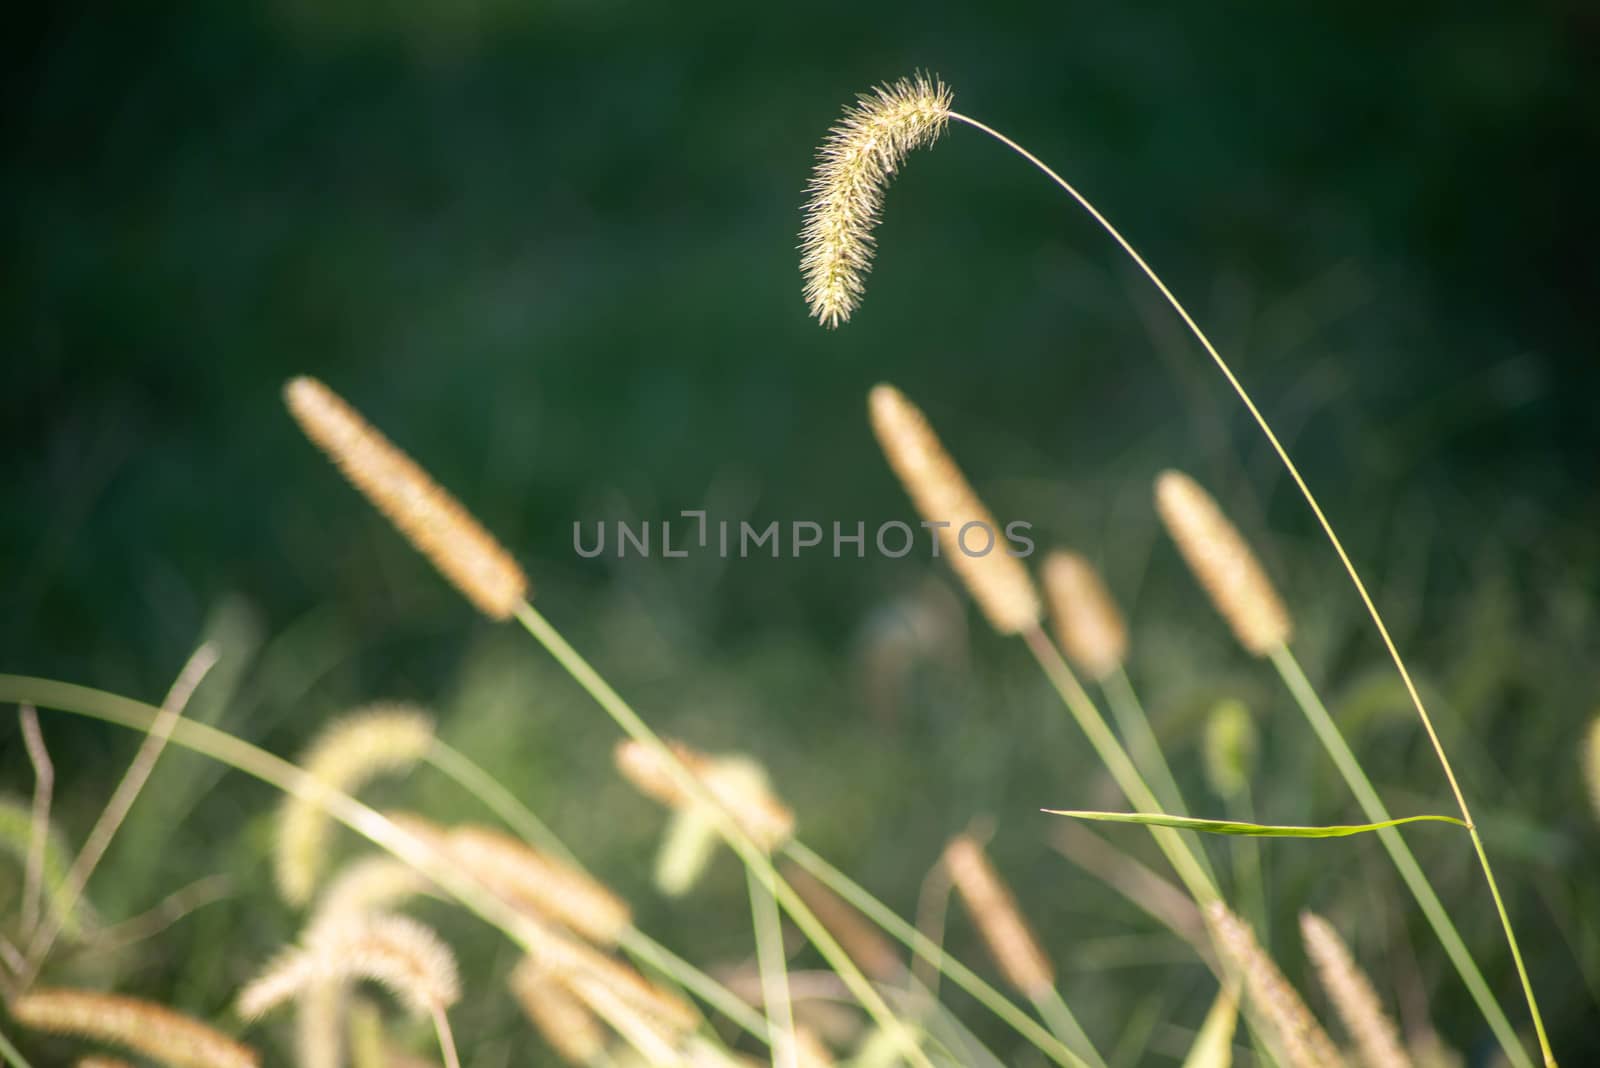 Full frame image of a swooping cattail, soft and gentle in the foreground. Selective focus with tranquil green bokeh background and copy space.